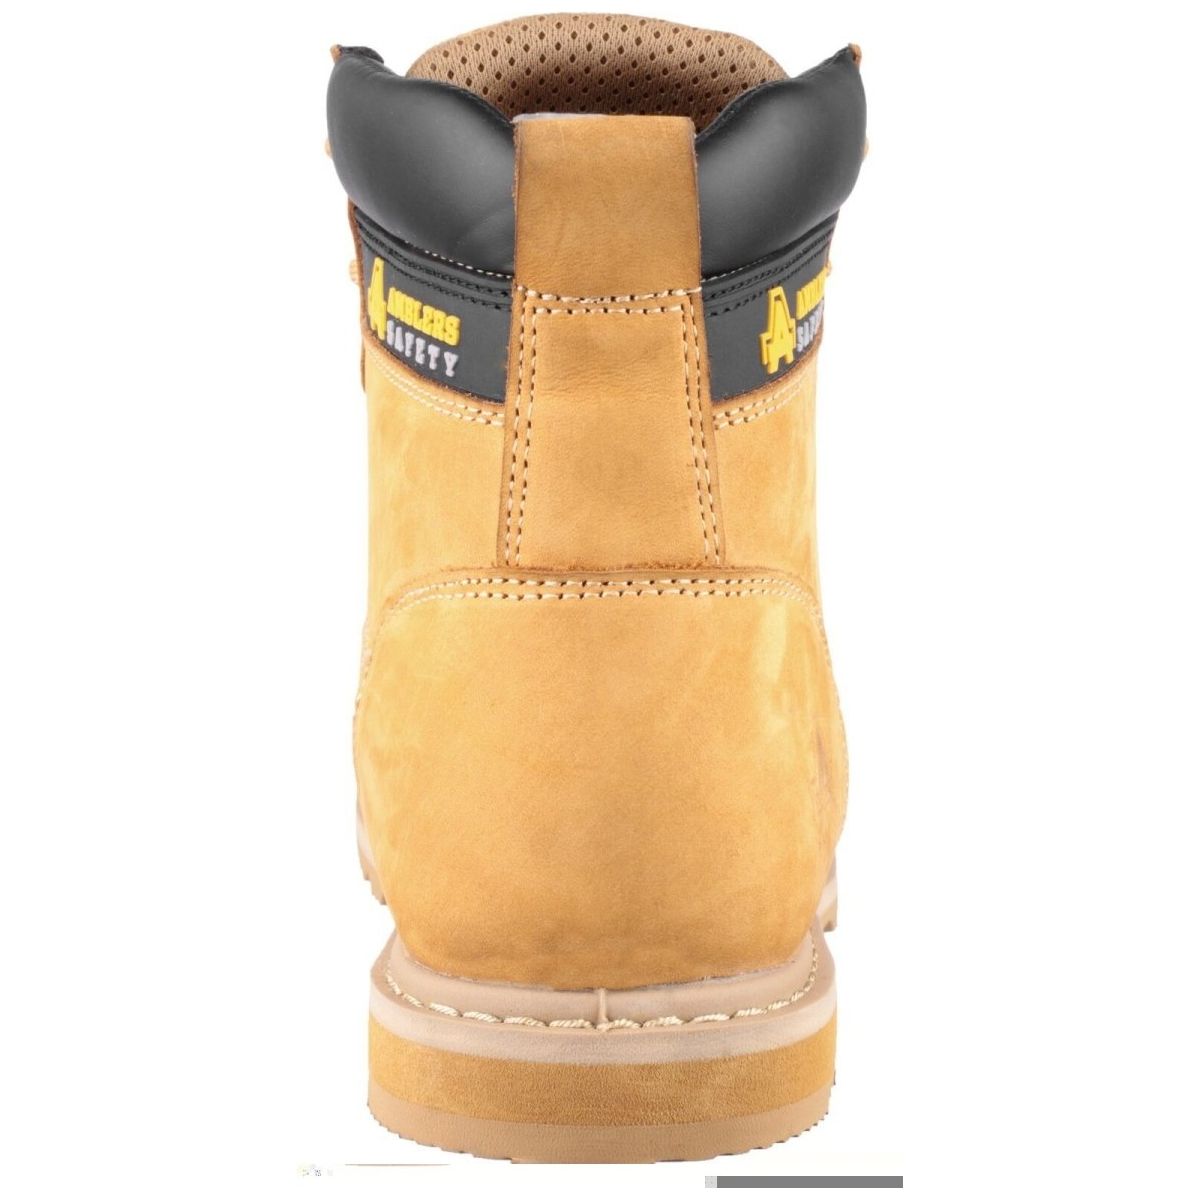 Amblers Safety 147 Welted Safety Boots S3 Mens - workweargurus.com